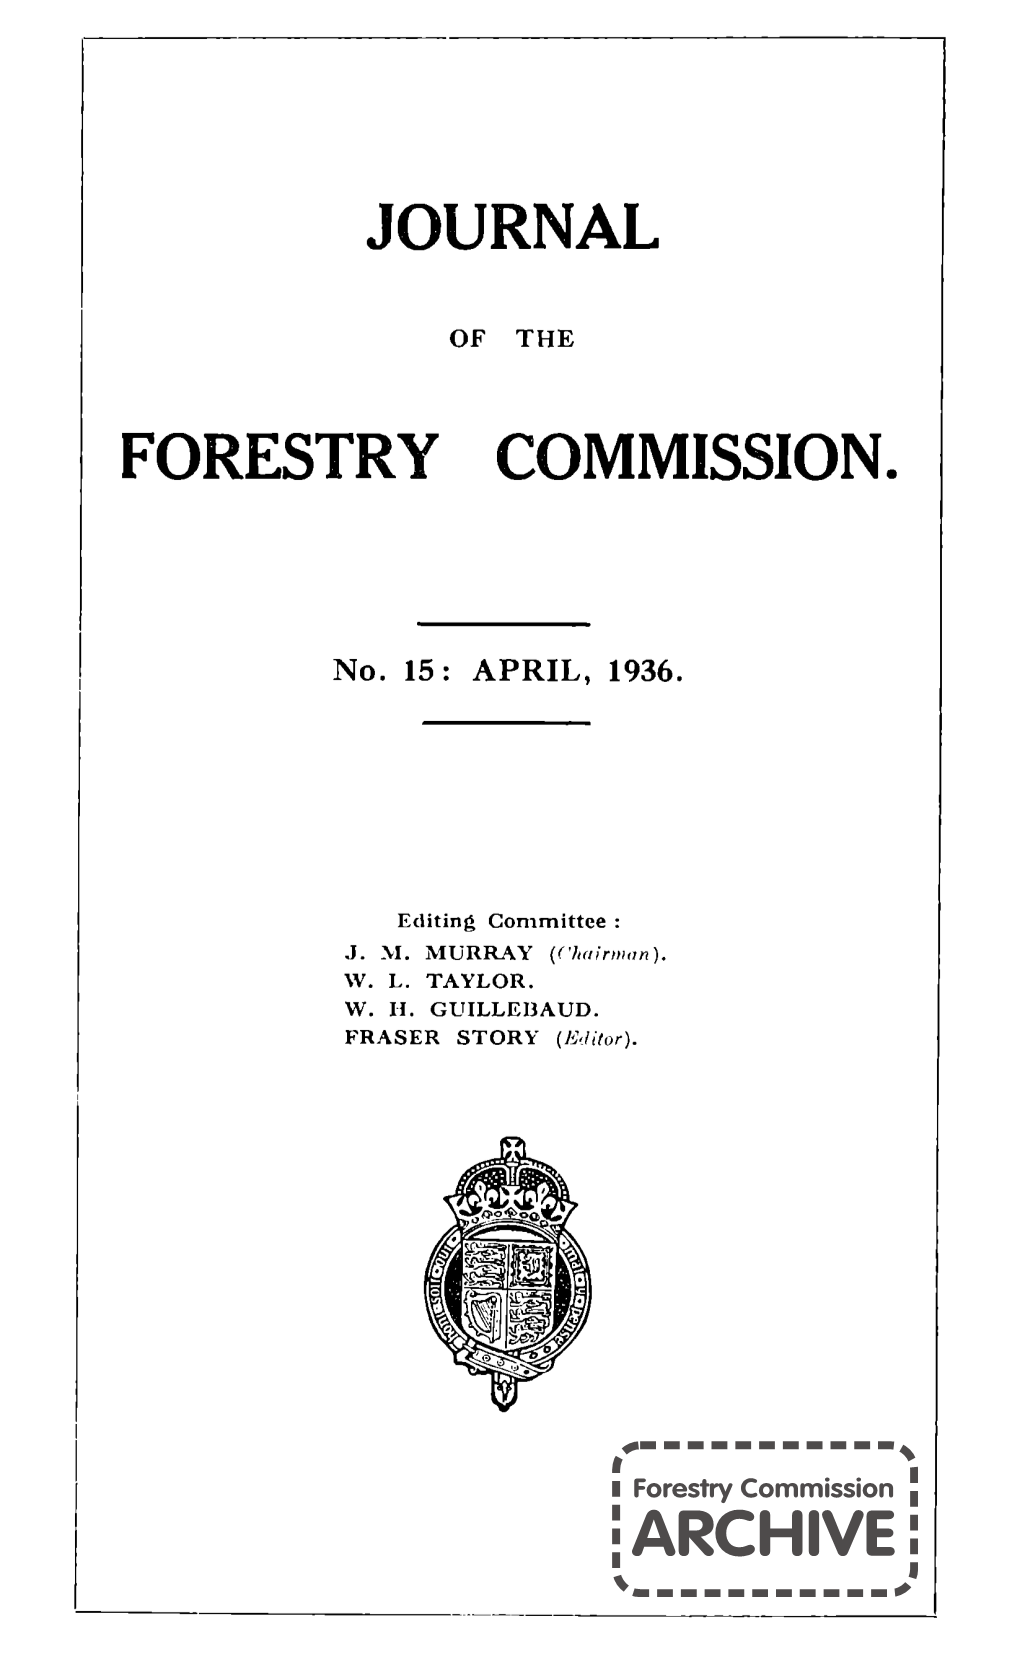 Forestry Commission Journal